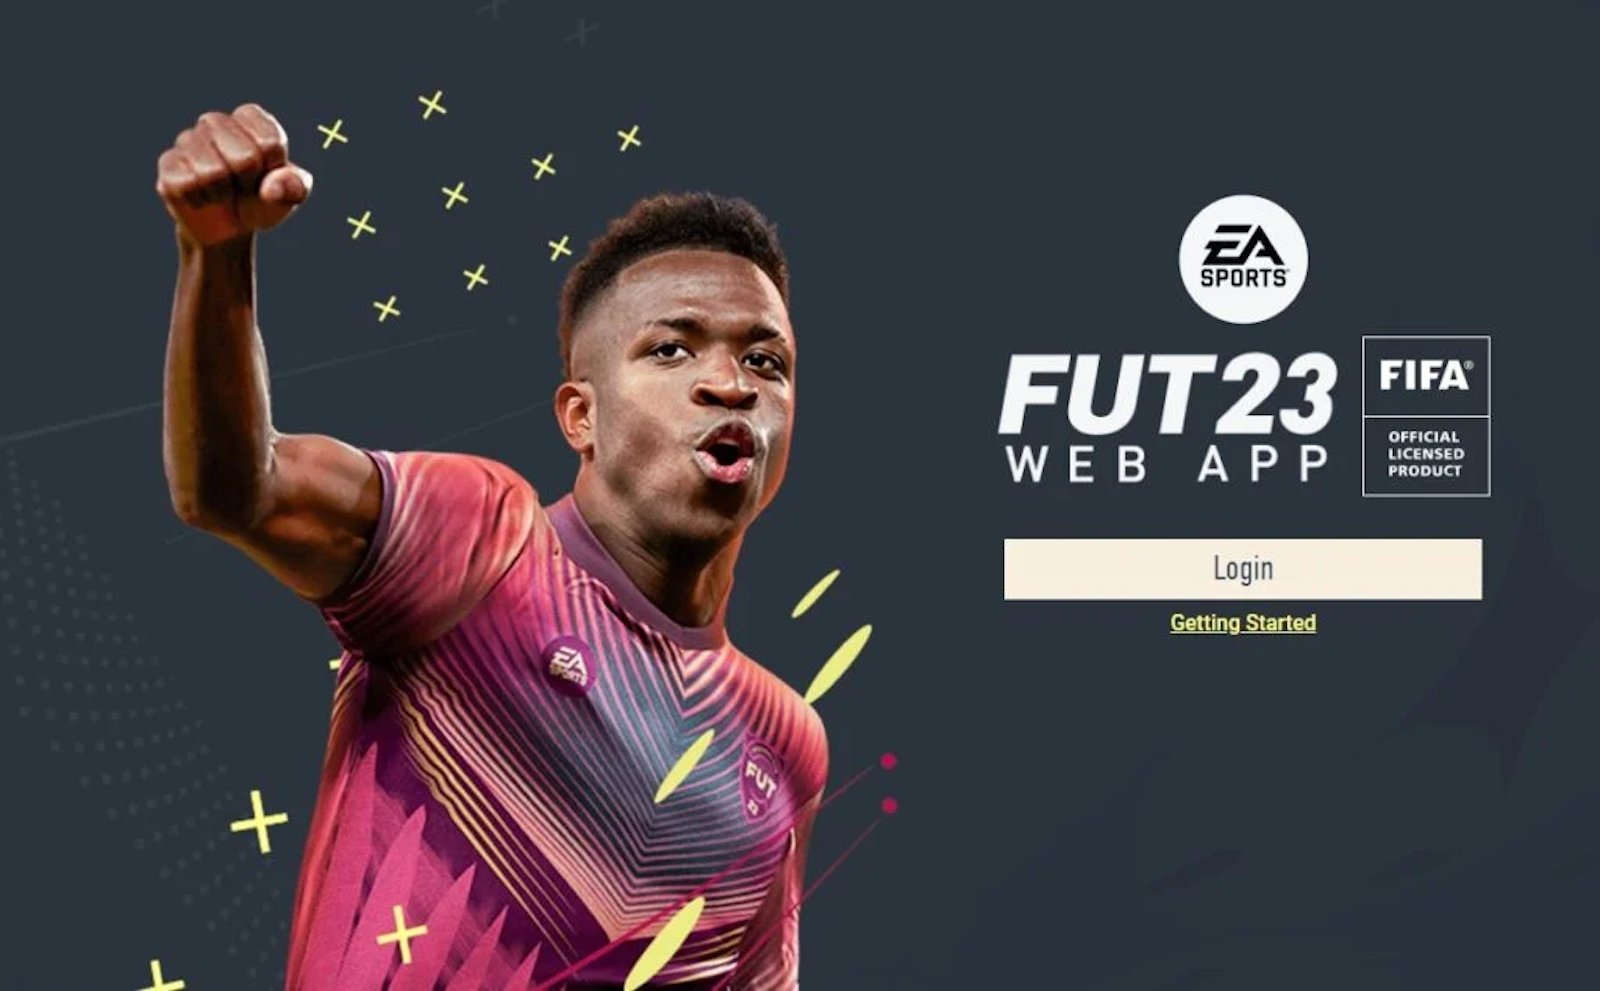 FIFA 23 web app is now live but it's having some issues - Dot Esports